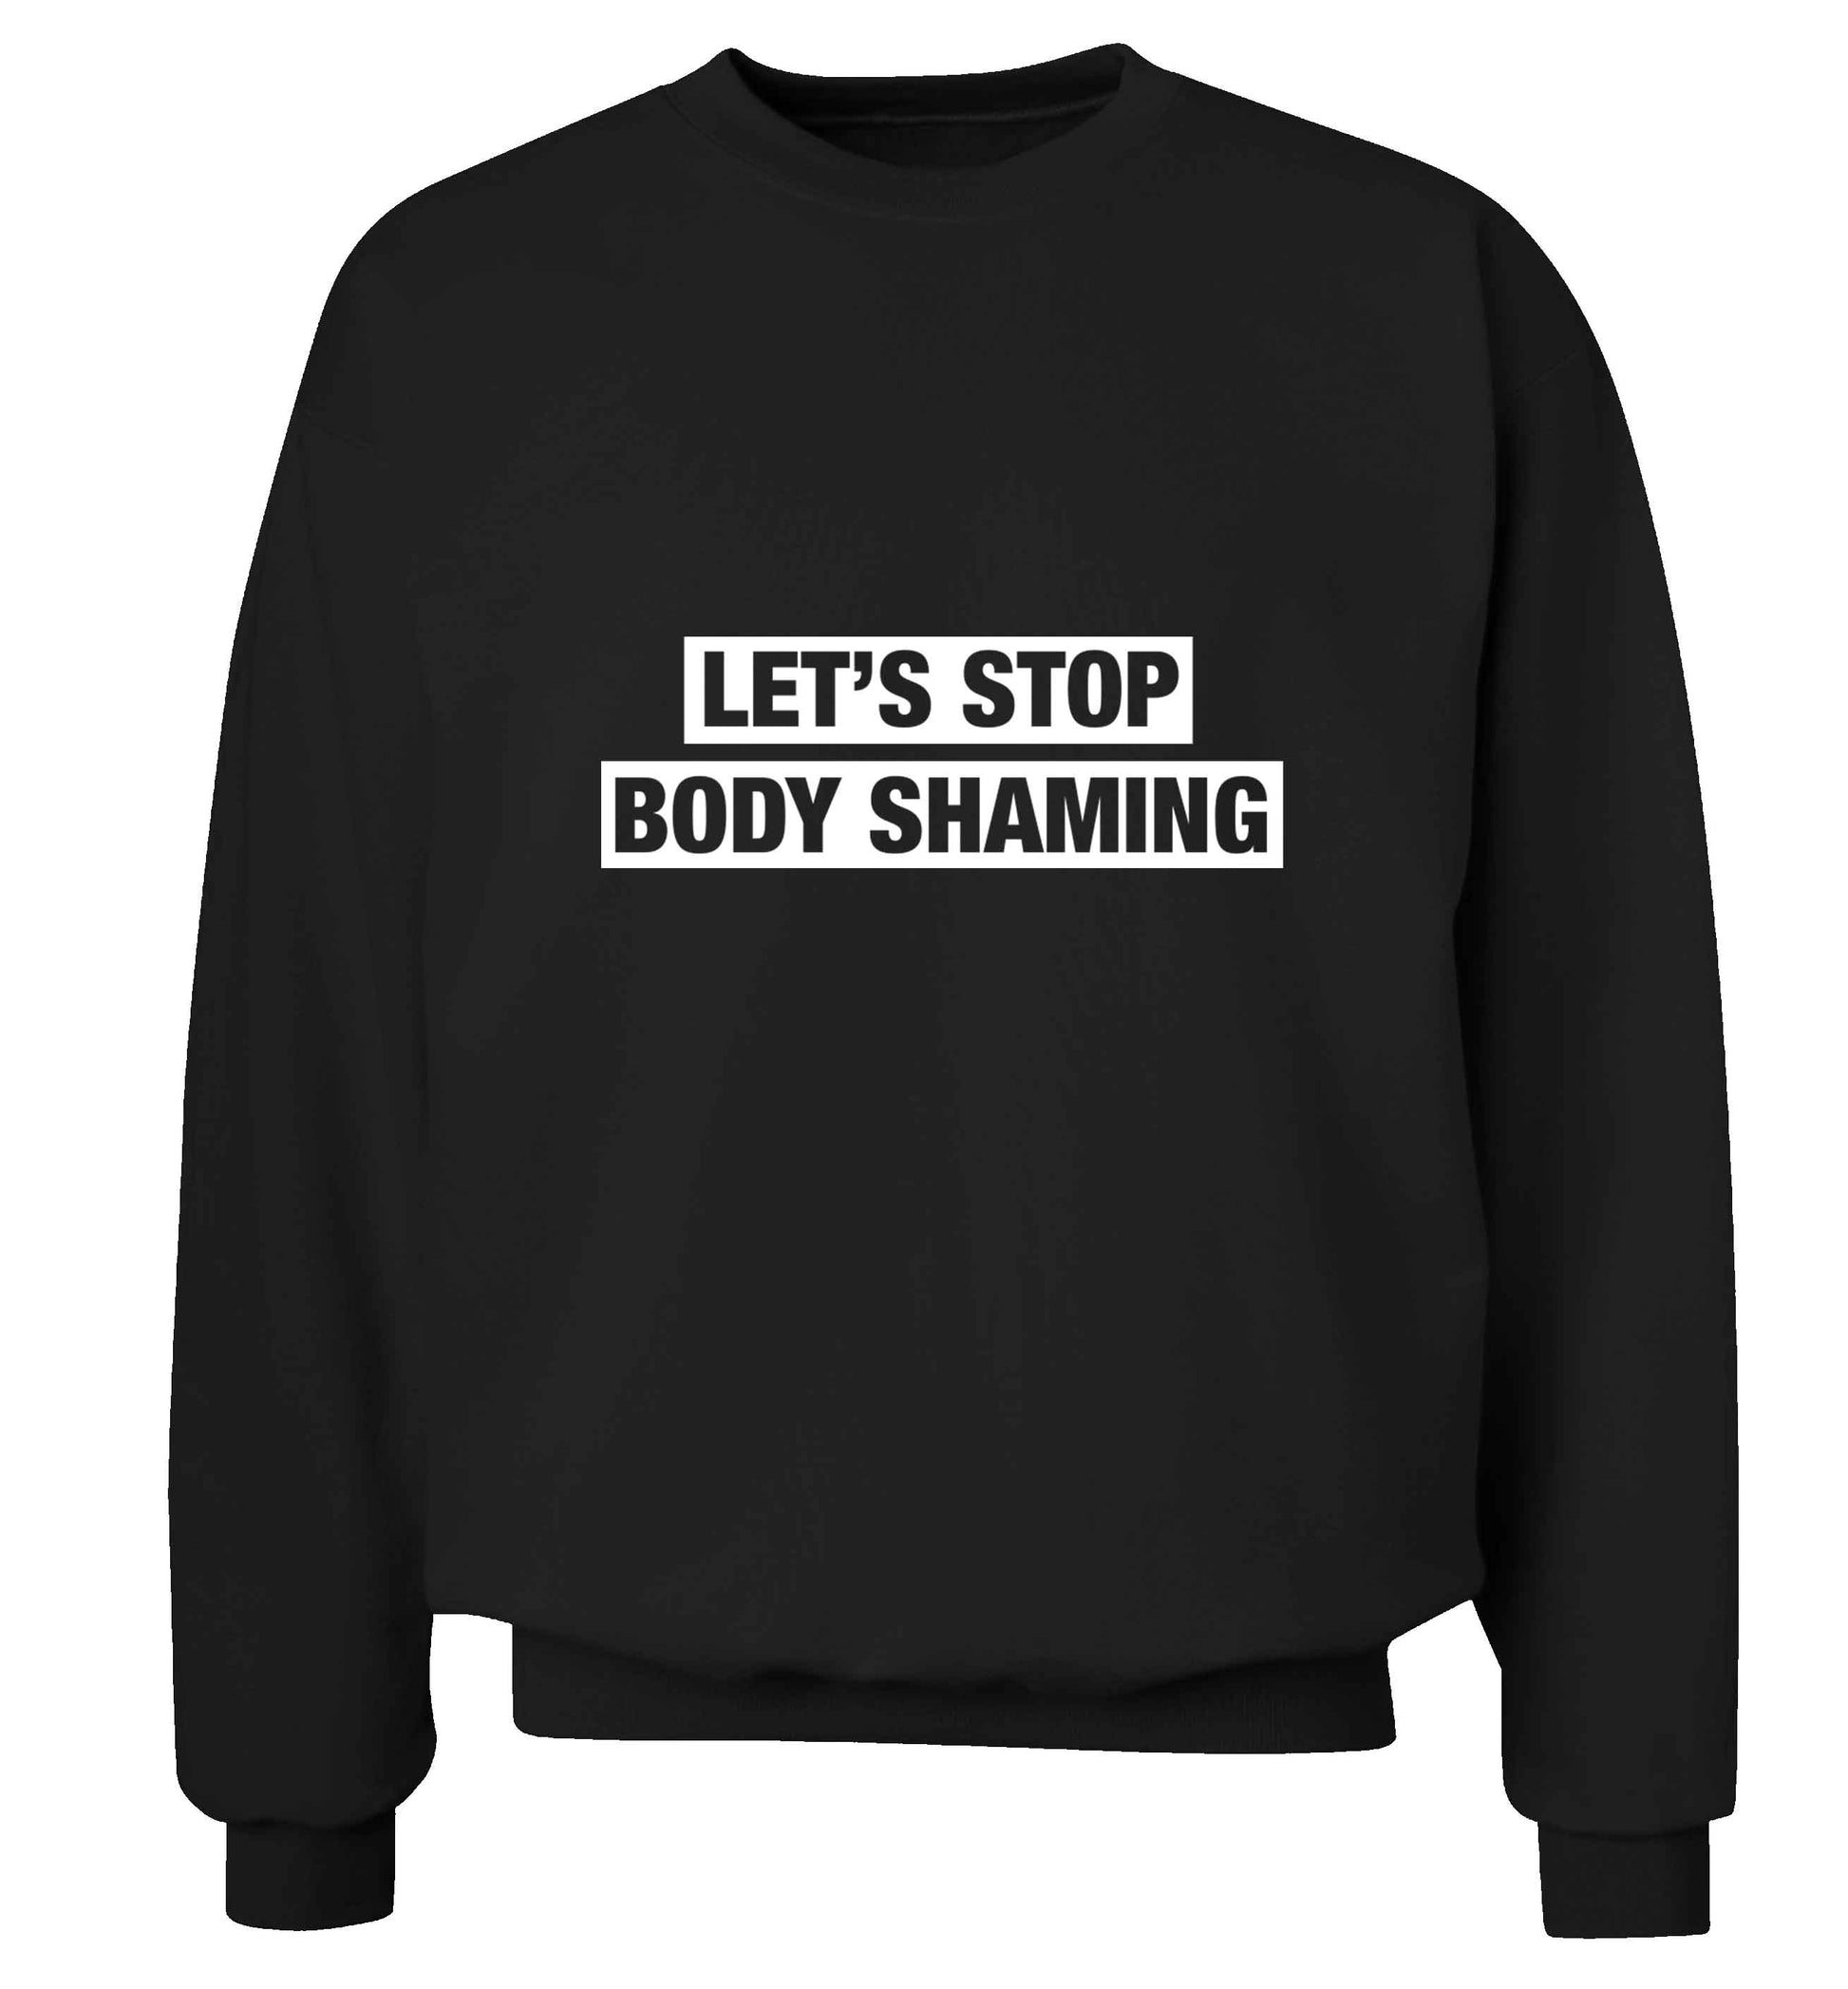 Let's stop body shaming adult's unisex black sweater 2XL